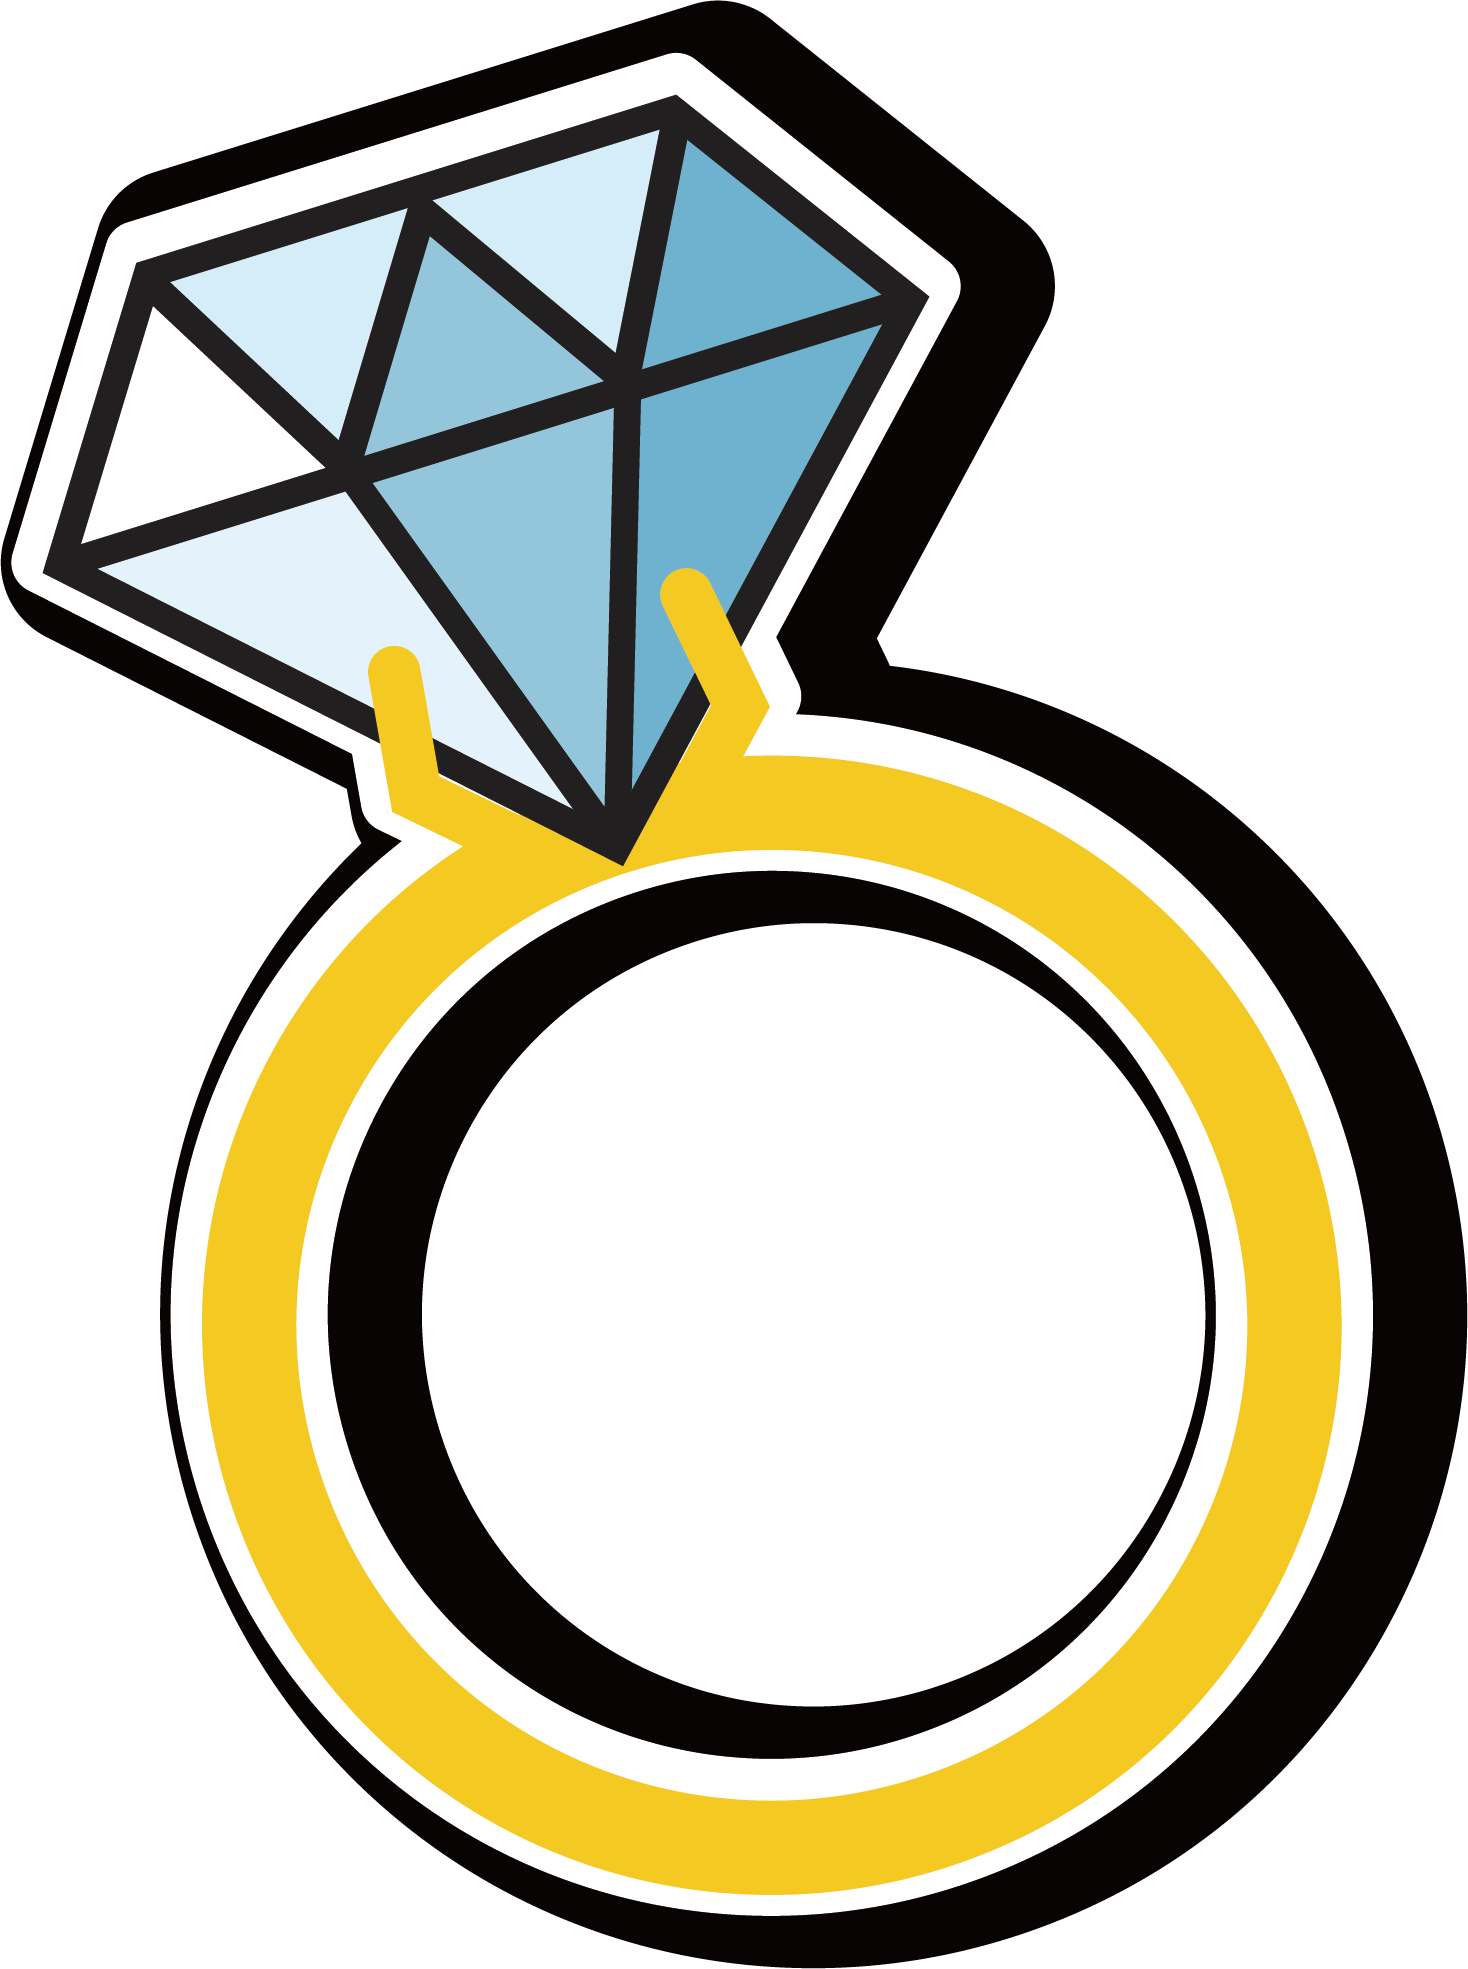 Download Blue Ring Diamond Gemstone Vector HD Image Free PNG Clipart ...